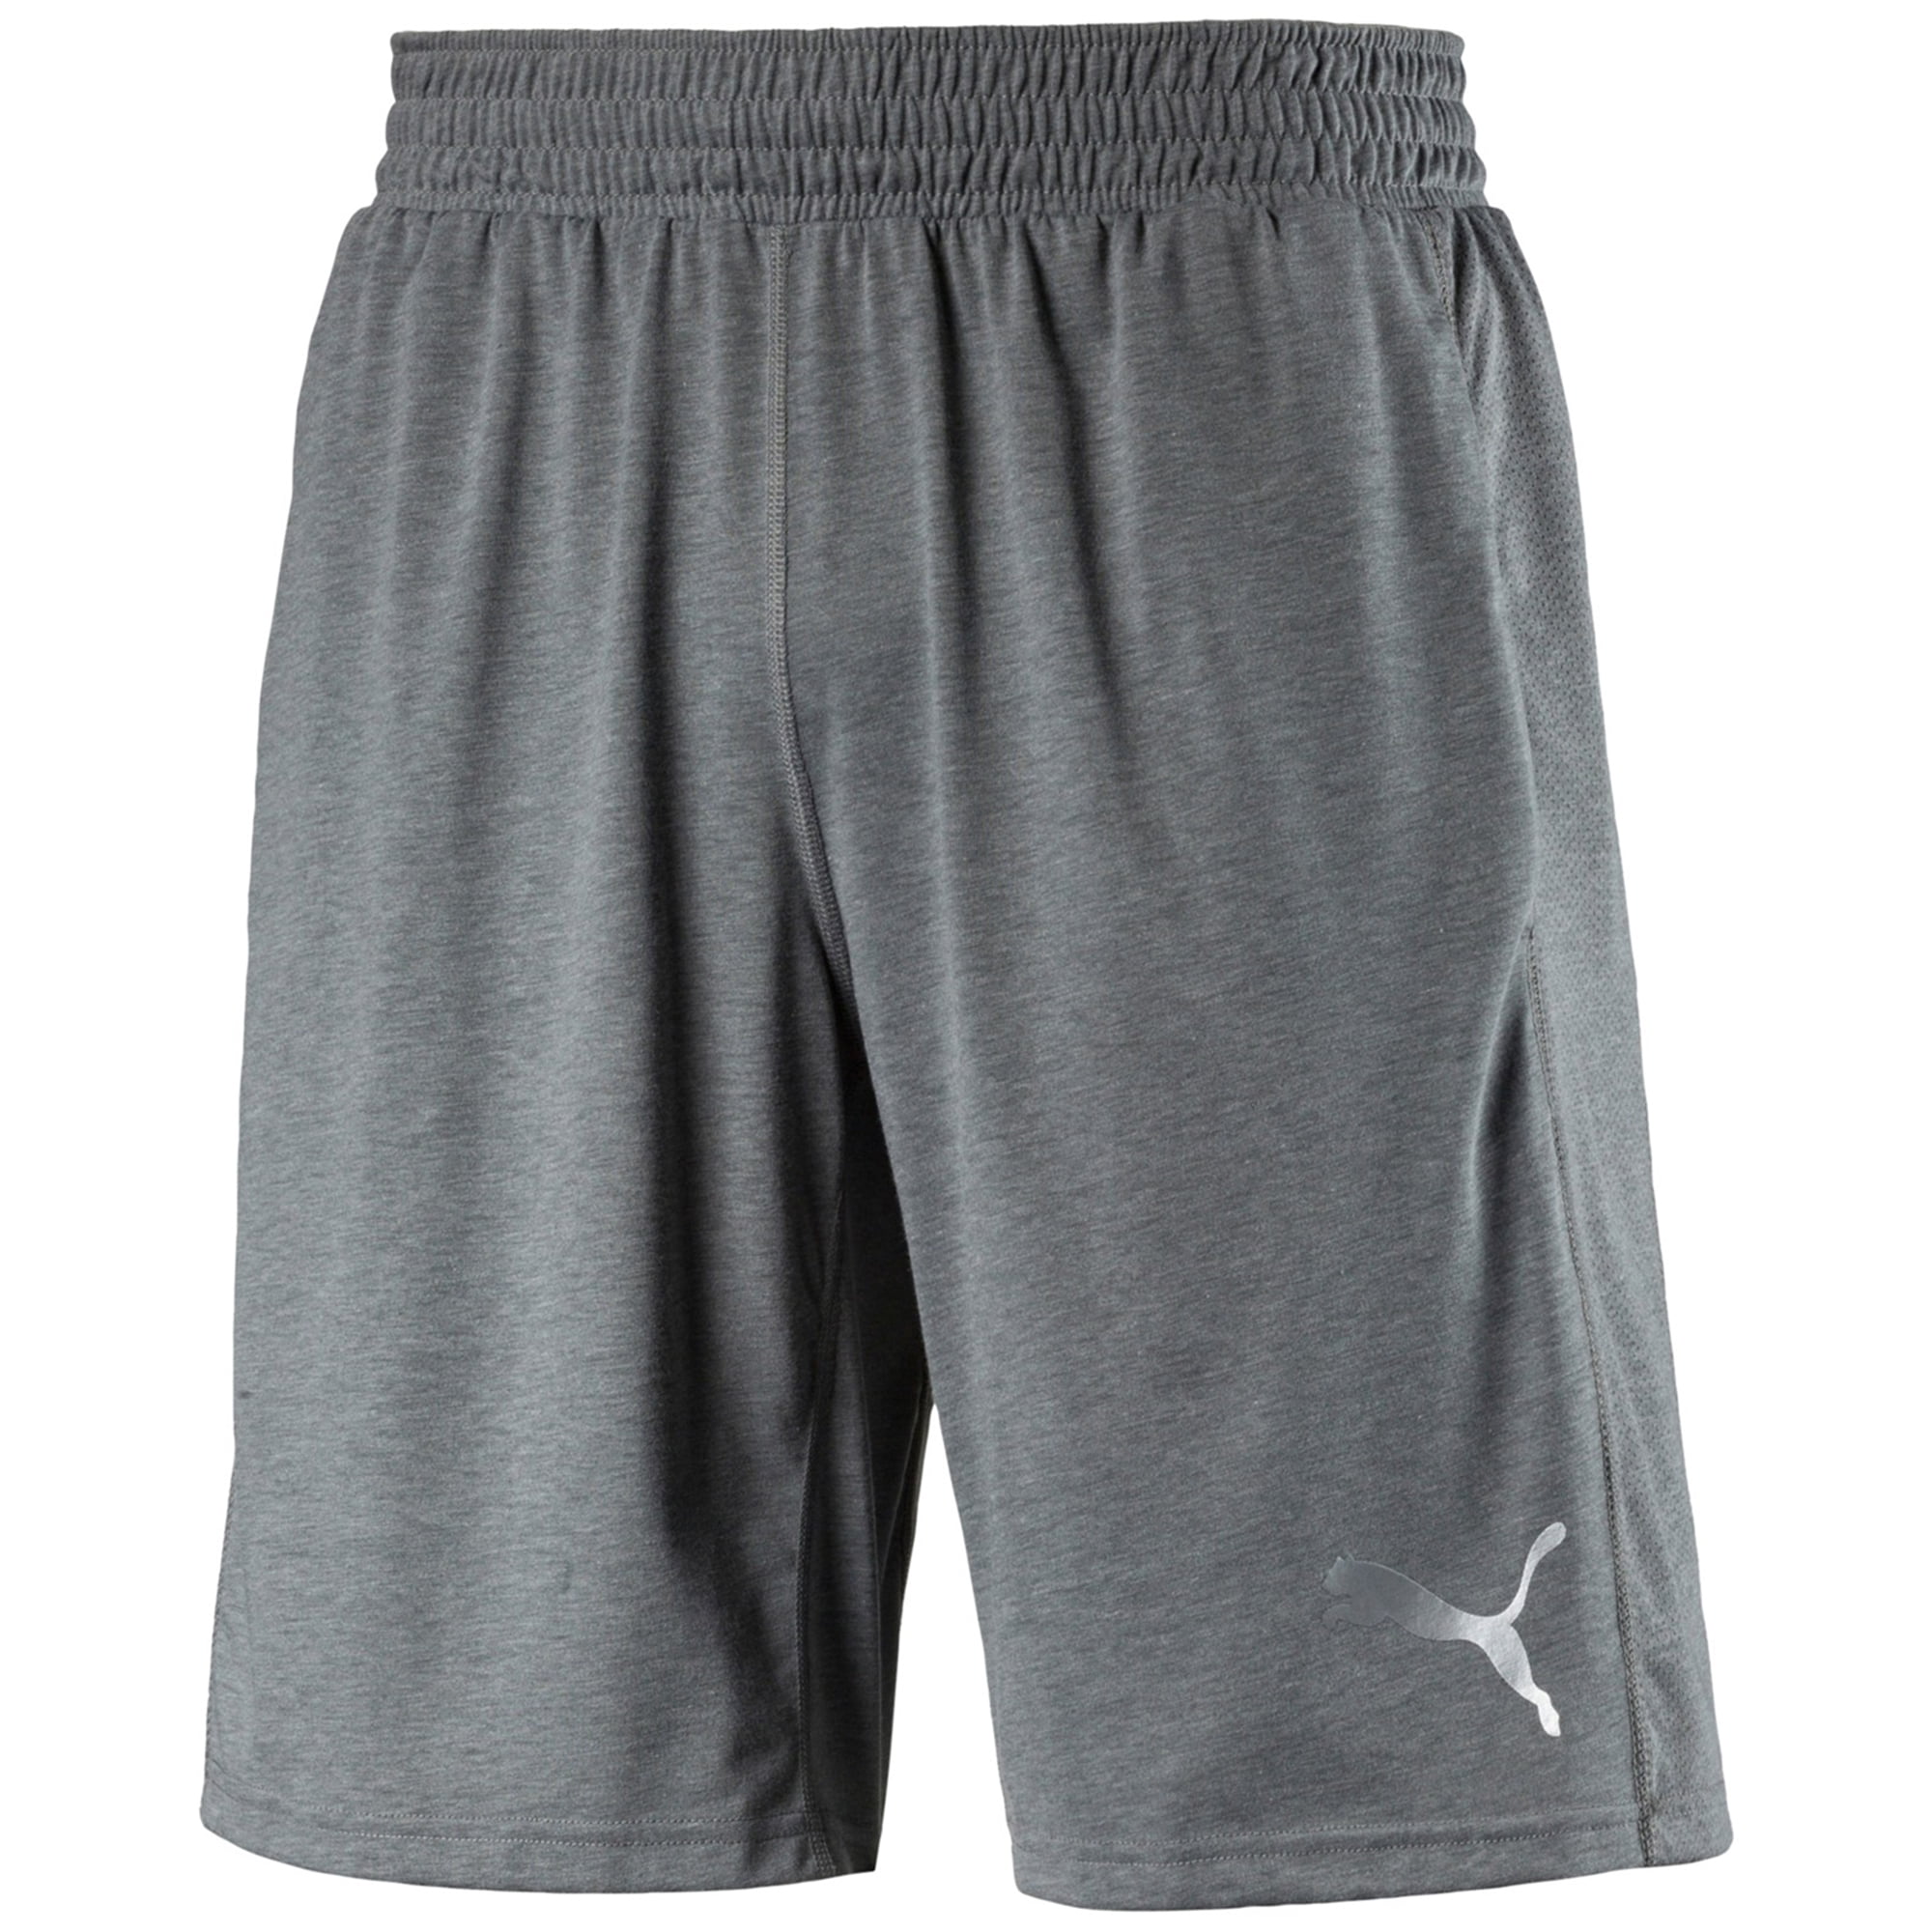 Simple Walmart Mens Workout Shorts for push your ABS